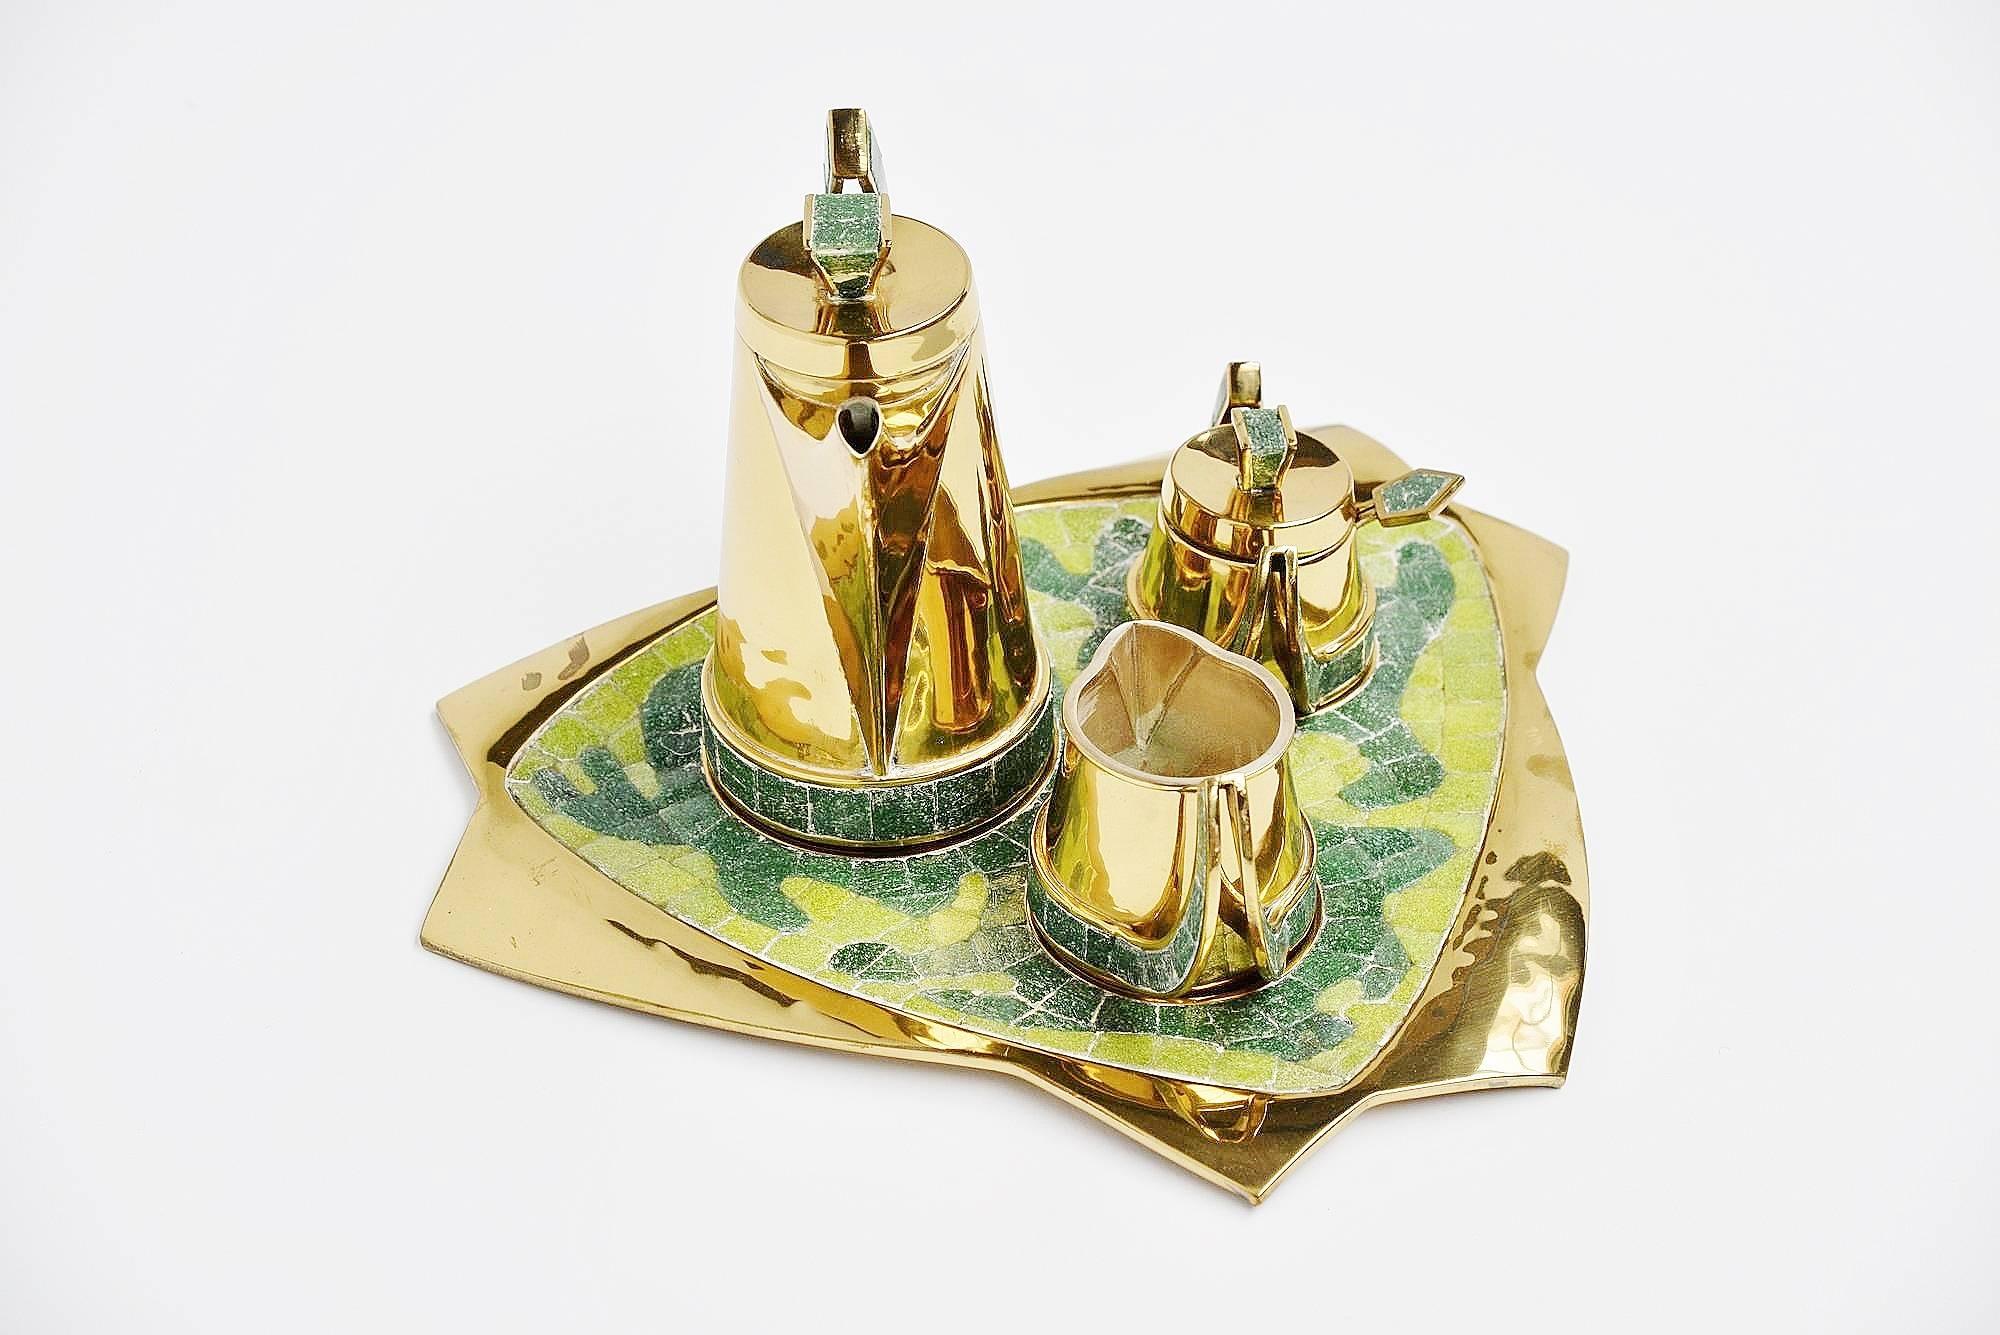 Super nice brass and mosaic tea set designed by Salvador Teran and handmade in Mexico, 1952. This beautiful tea seat was for sure inspired by the work of Salvador Gaudi. The set is superbly made and in very good (still shiny and clean) condition.